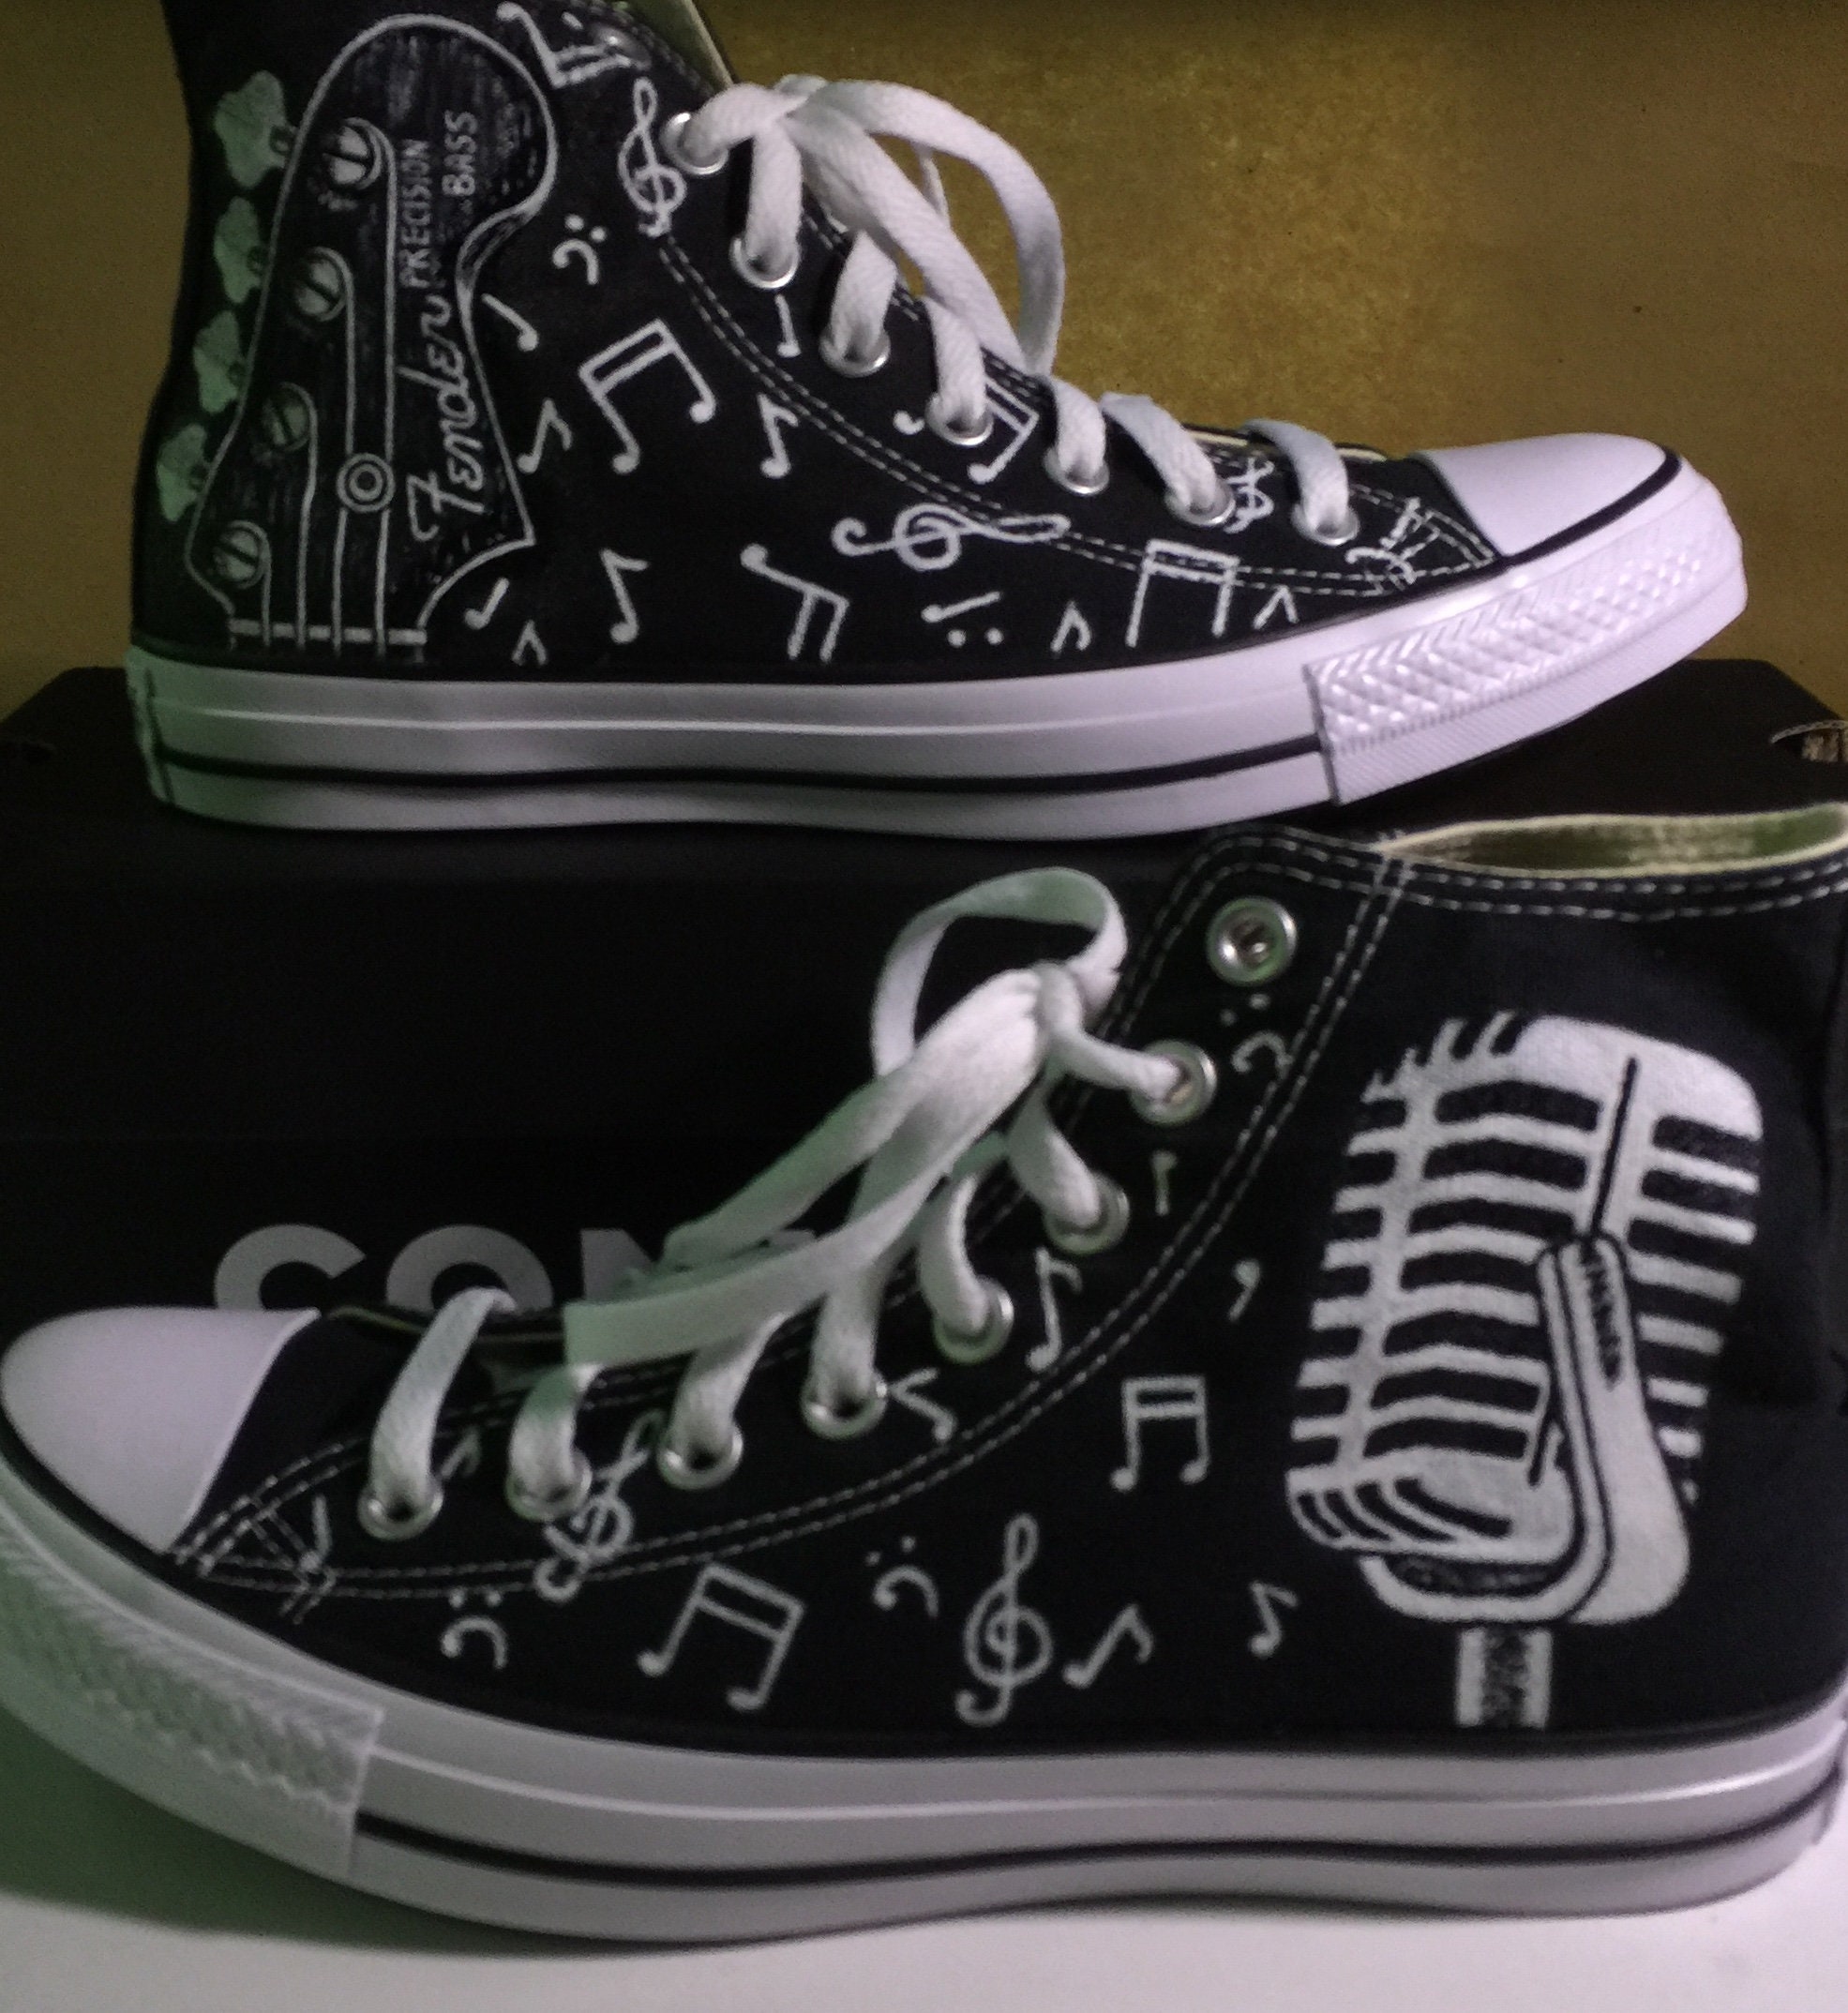 Musical Rock & Roll Fender and Microphone Converse Chuck - Etsy